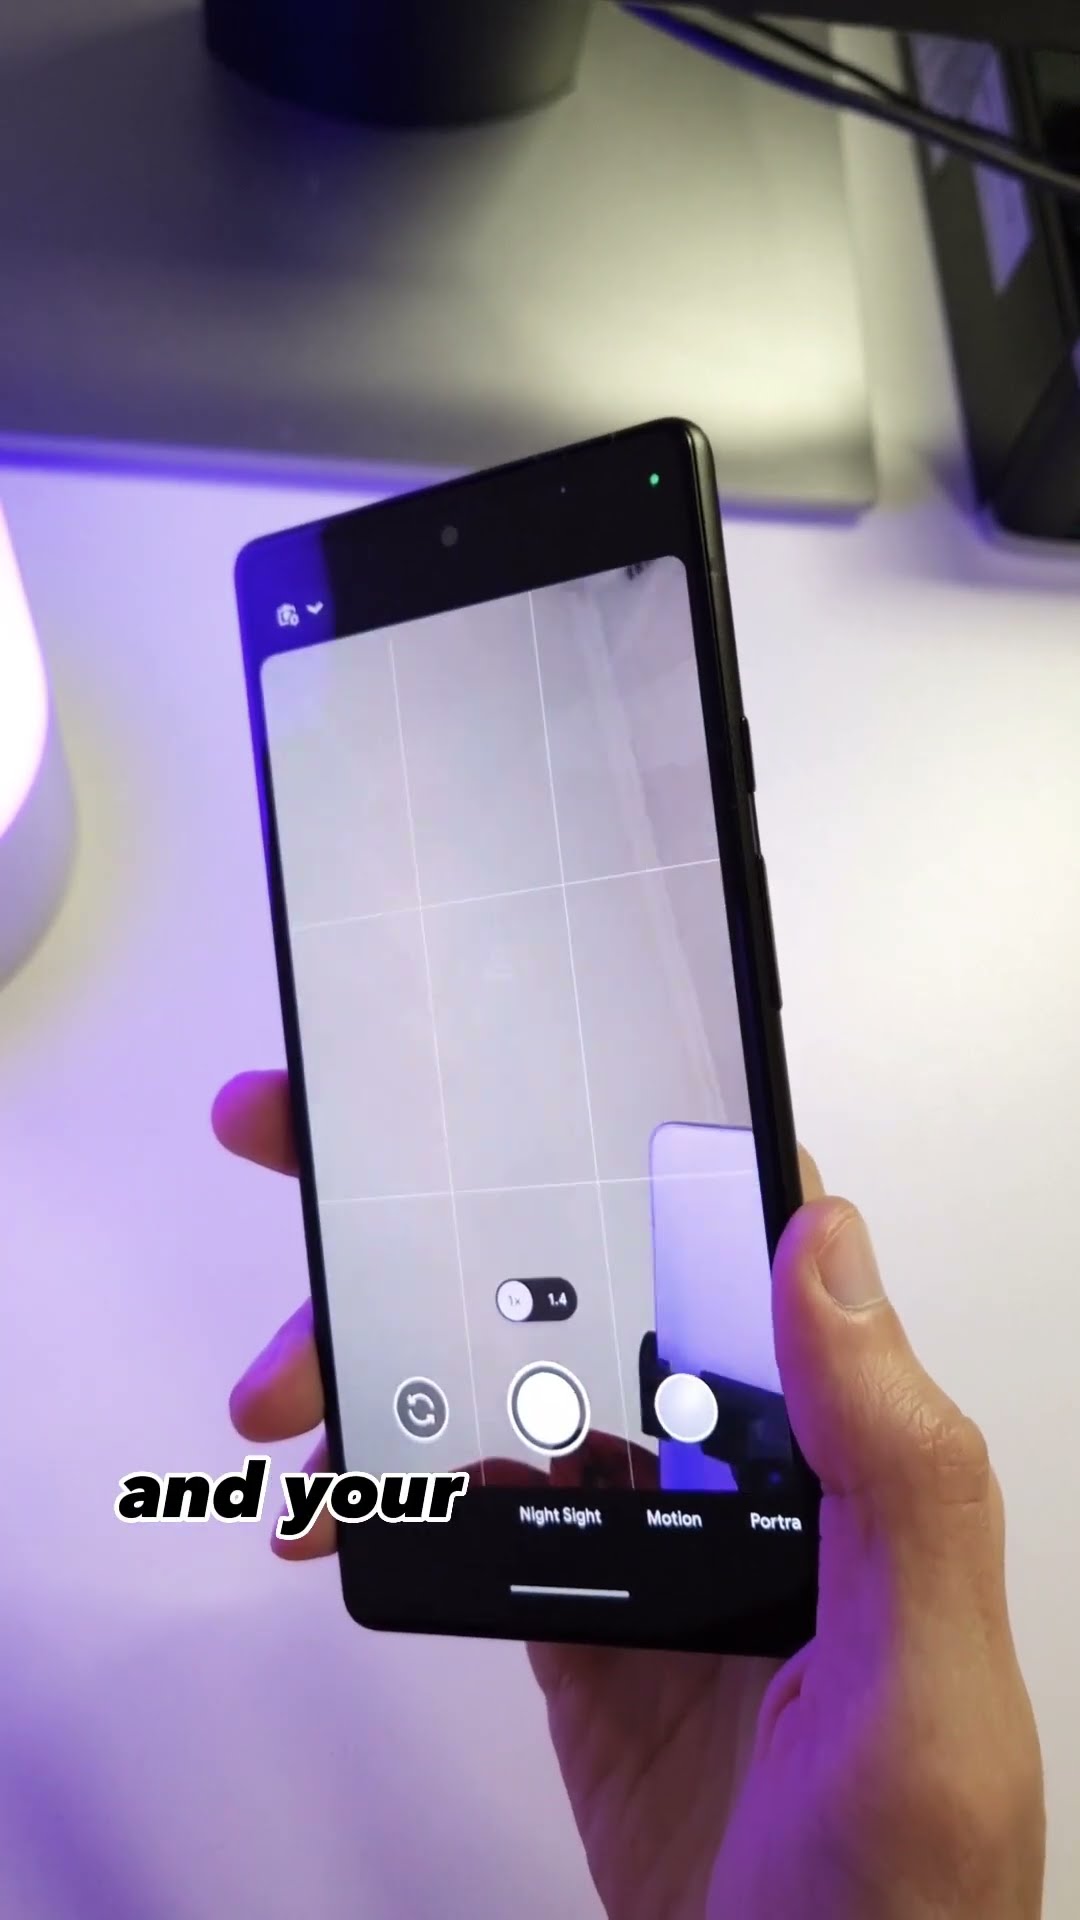 Master your pixel: unlock secret gestures to get the most out of your device #shorts #wondershare